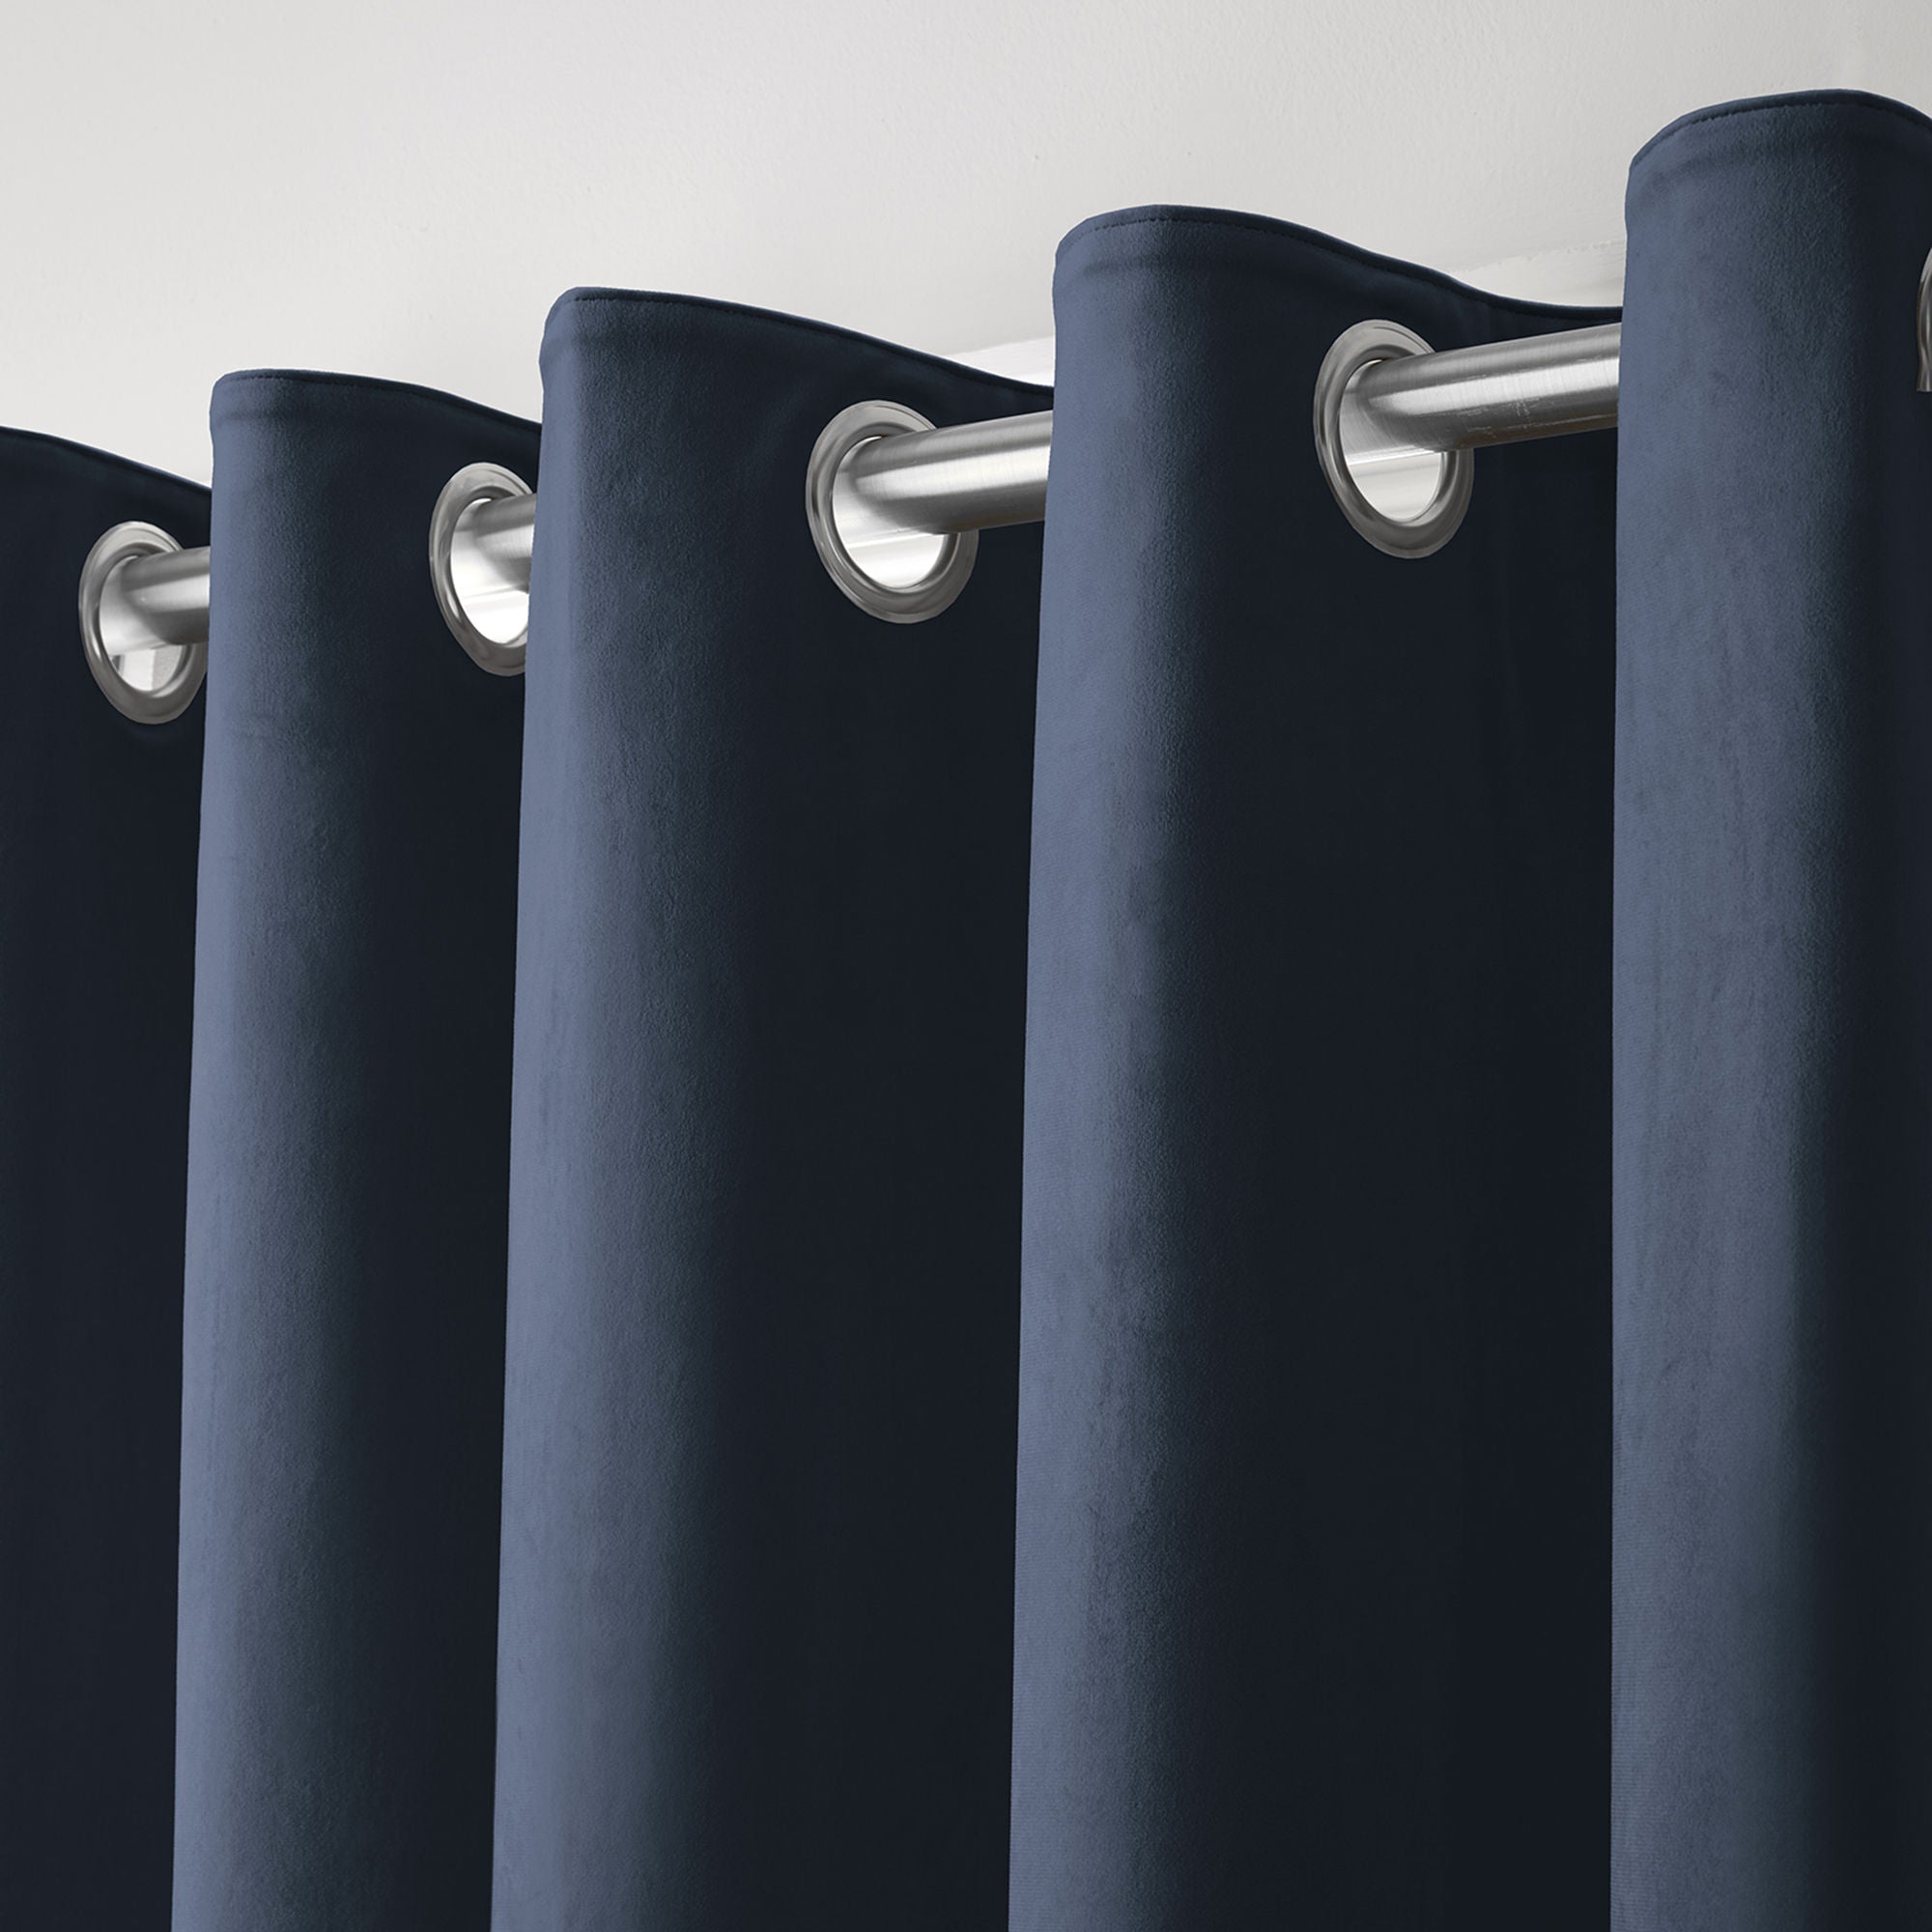 Montrose Pair of Eyelet Curtains by Laurence Llewelyn-Bowen in Navy - Pair of Eyelet Curtains - Laurence Llewelyn-Bowen